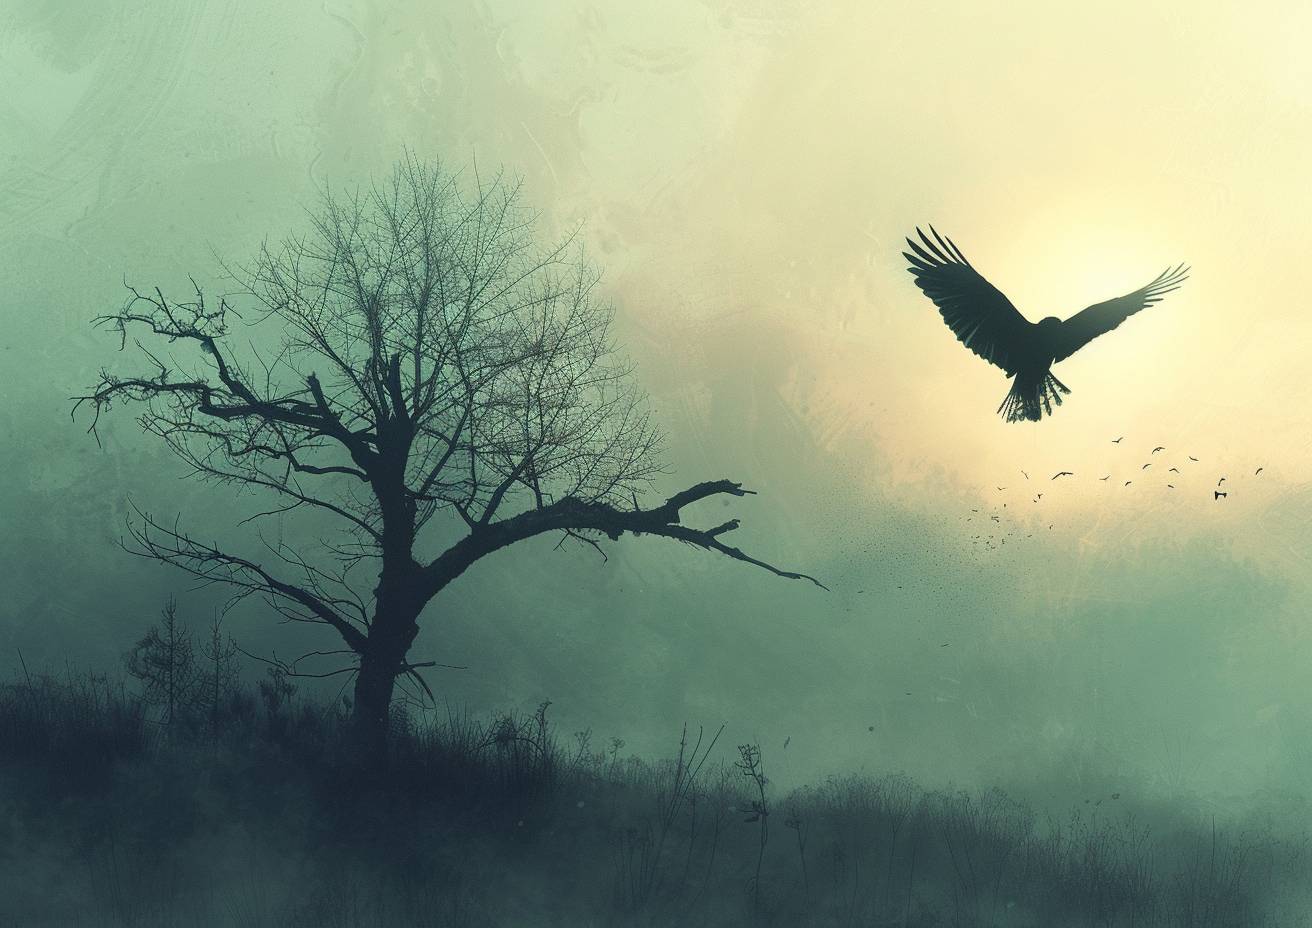 Minimalist landscape, a hawk launches itself from a dead tree, wings strobing in the sunlight, Apocalypsecore